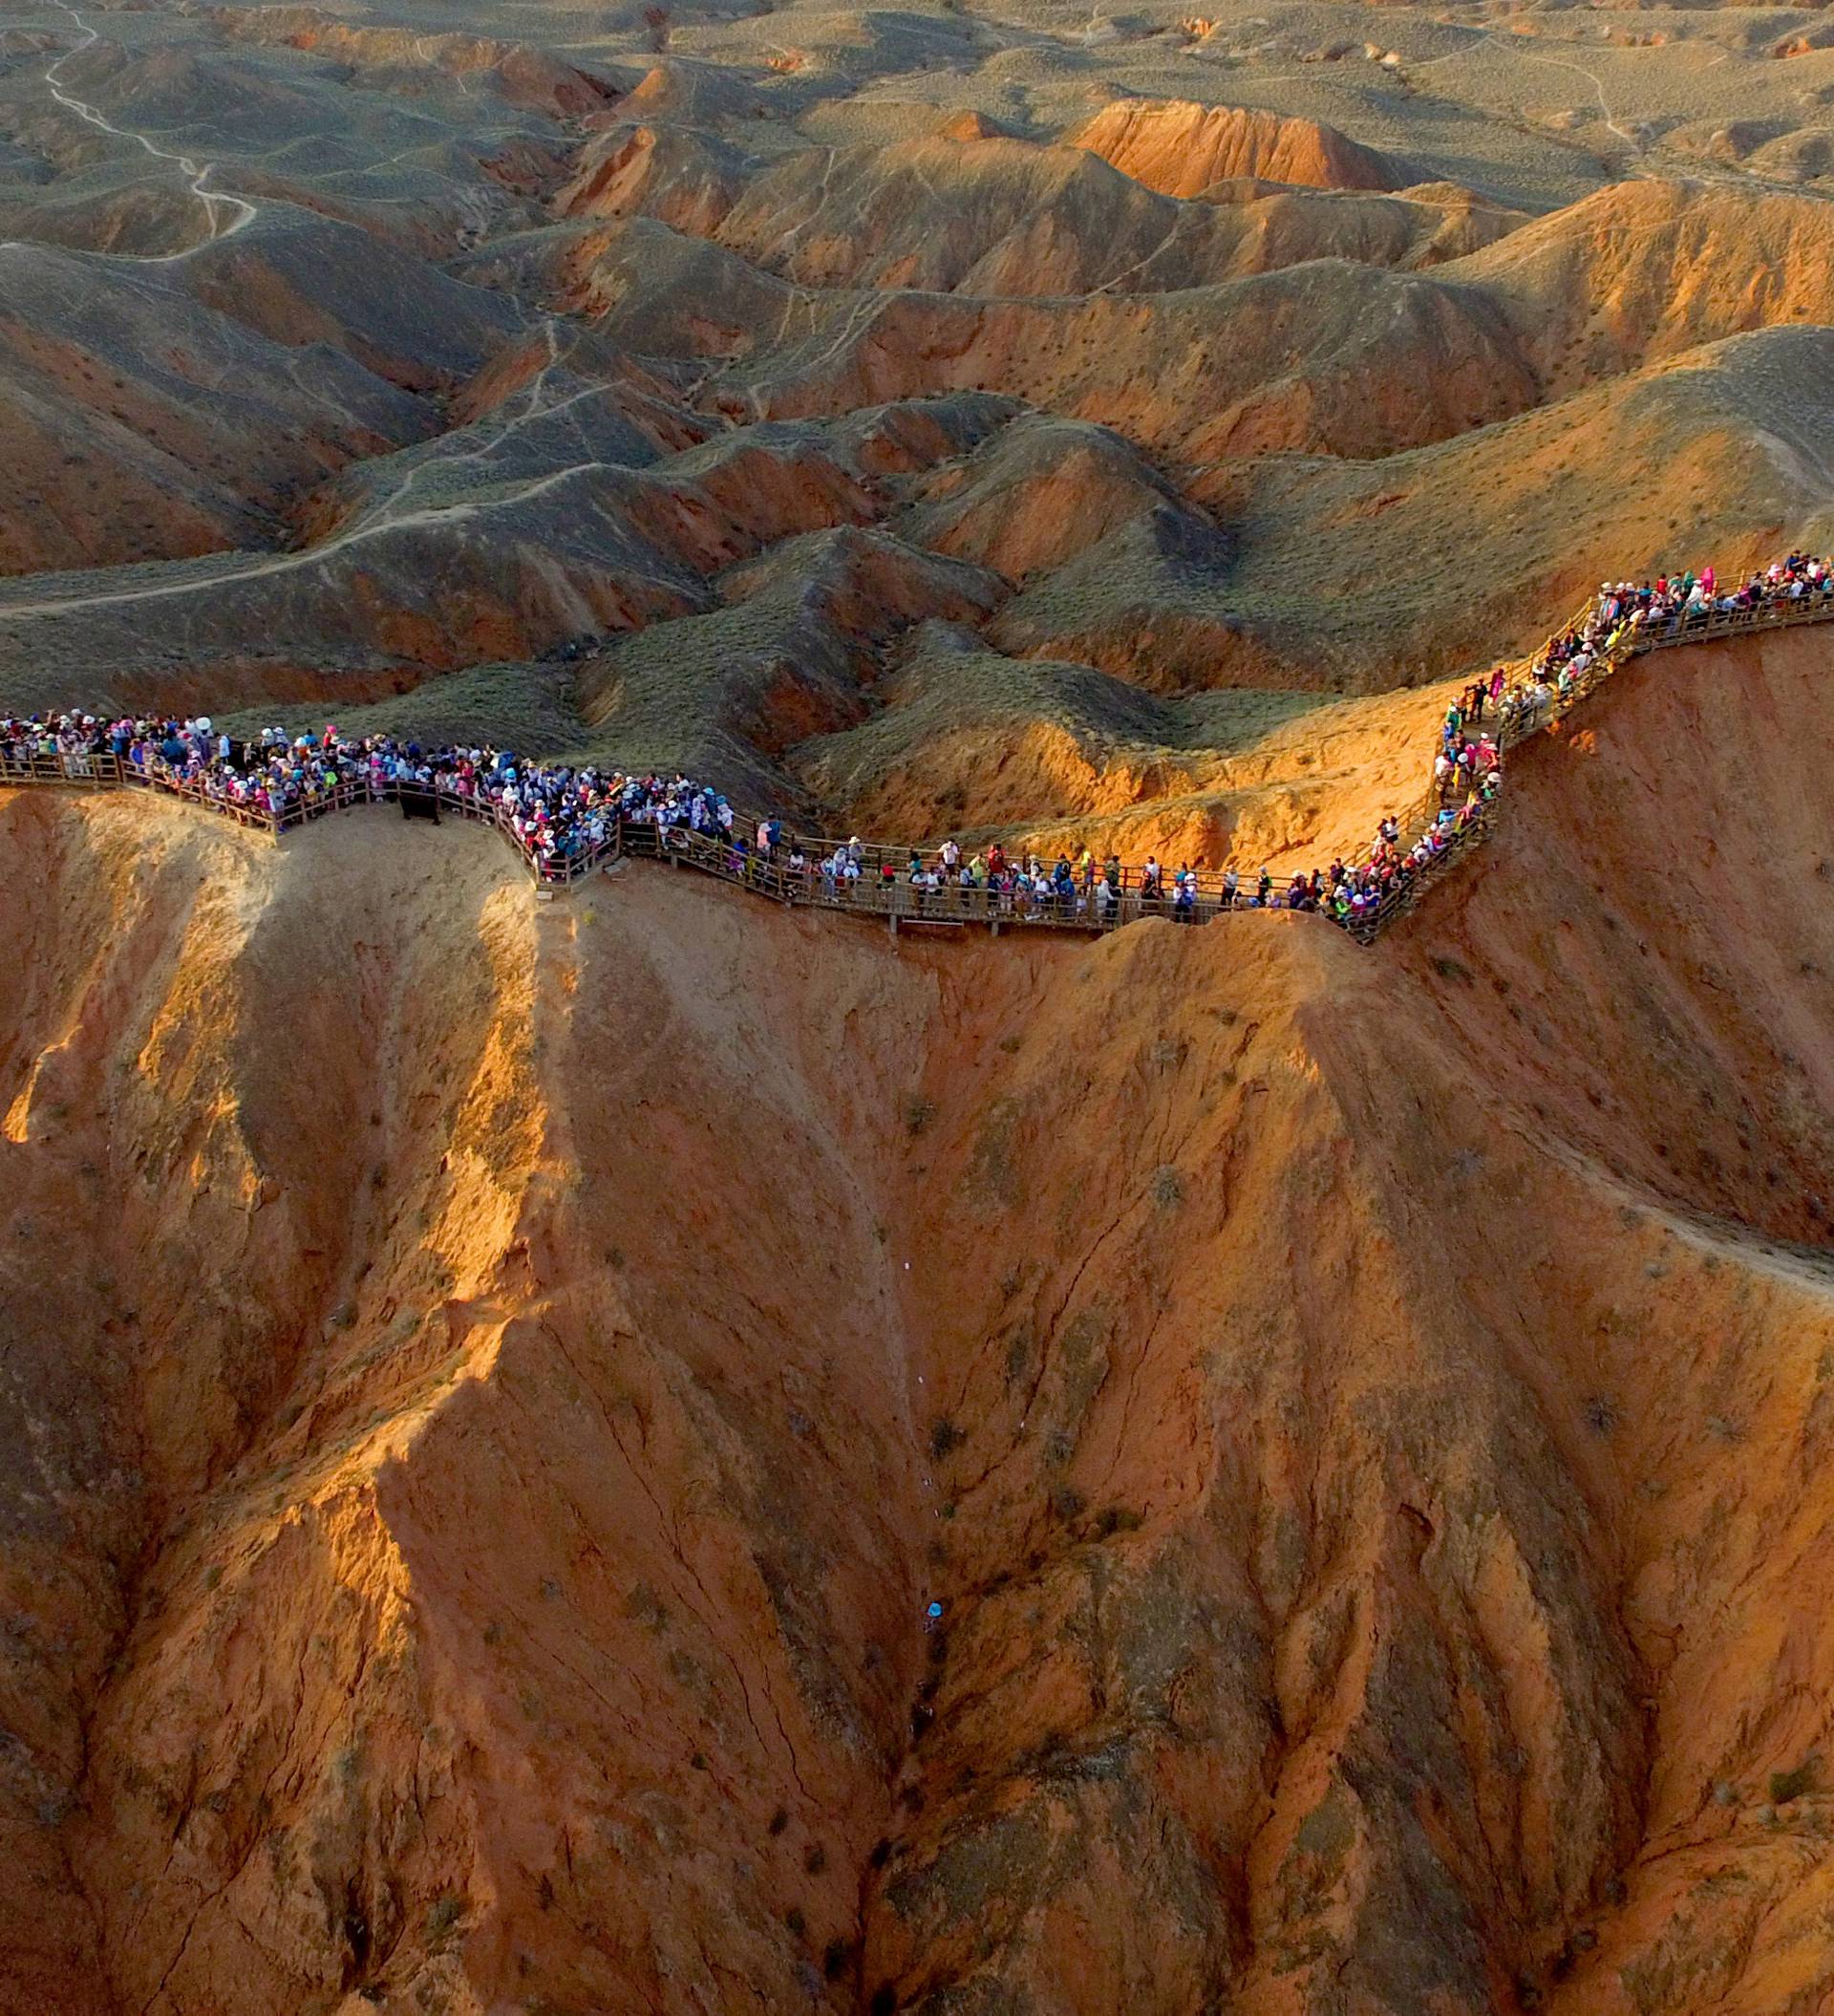 An aerial view shows people visiting an area of Danxia landform in Zhangye